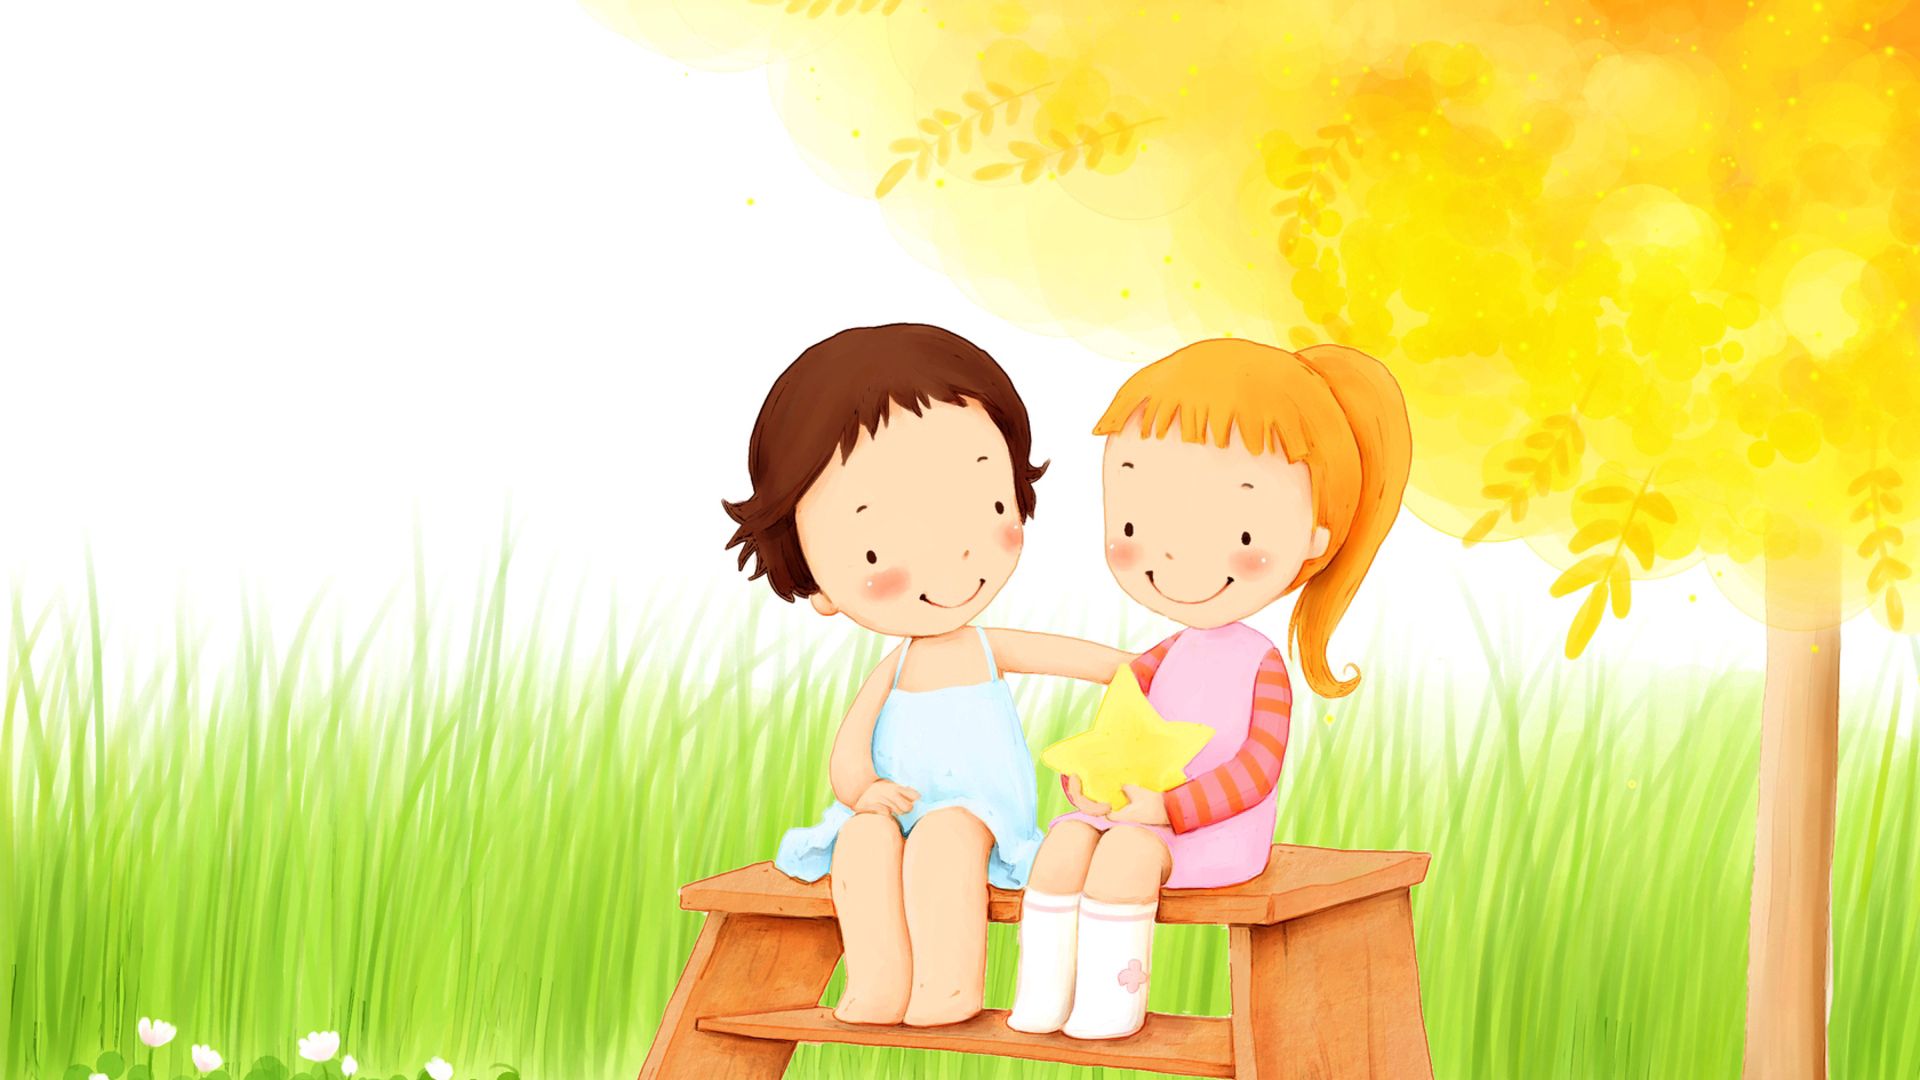 smiles, smile, flowers, girls, grass, children, miscellanea, miscellaneous, wood, tree, foliage, star cell phone wallpapers